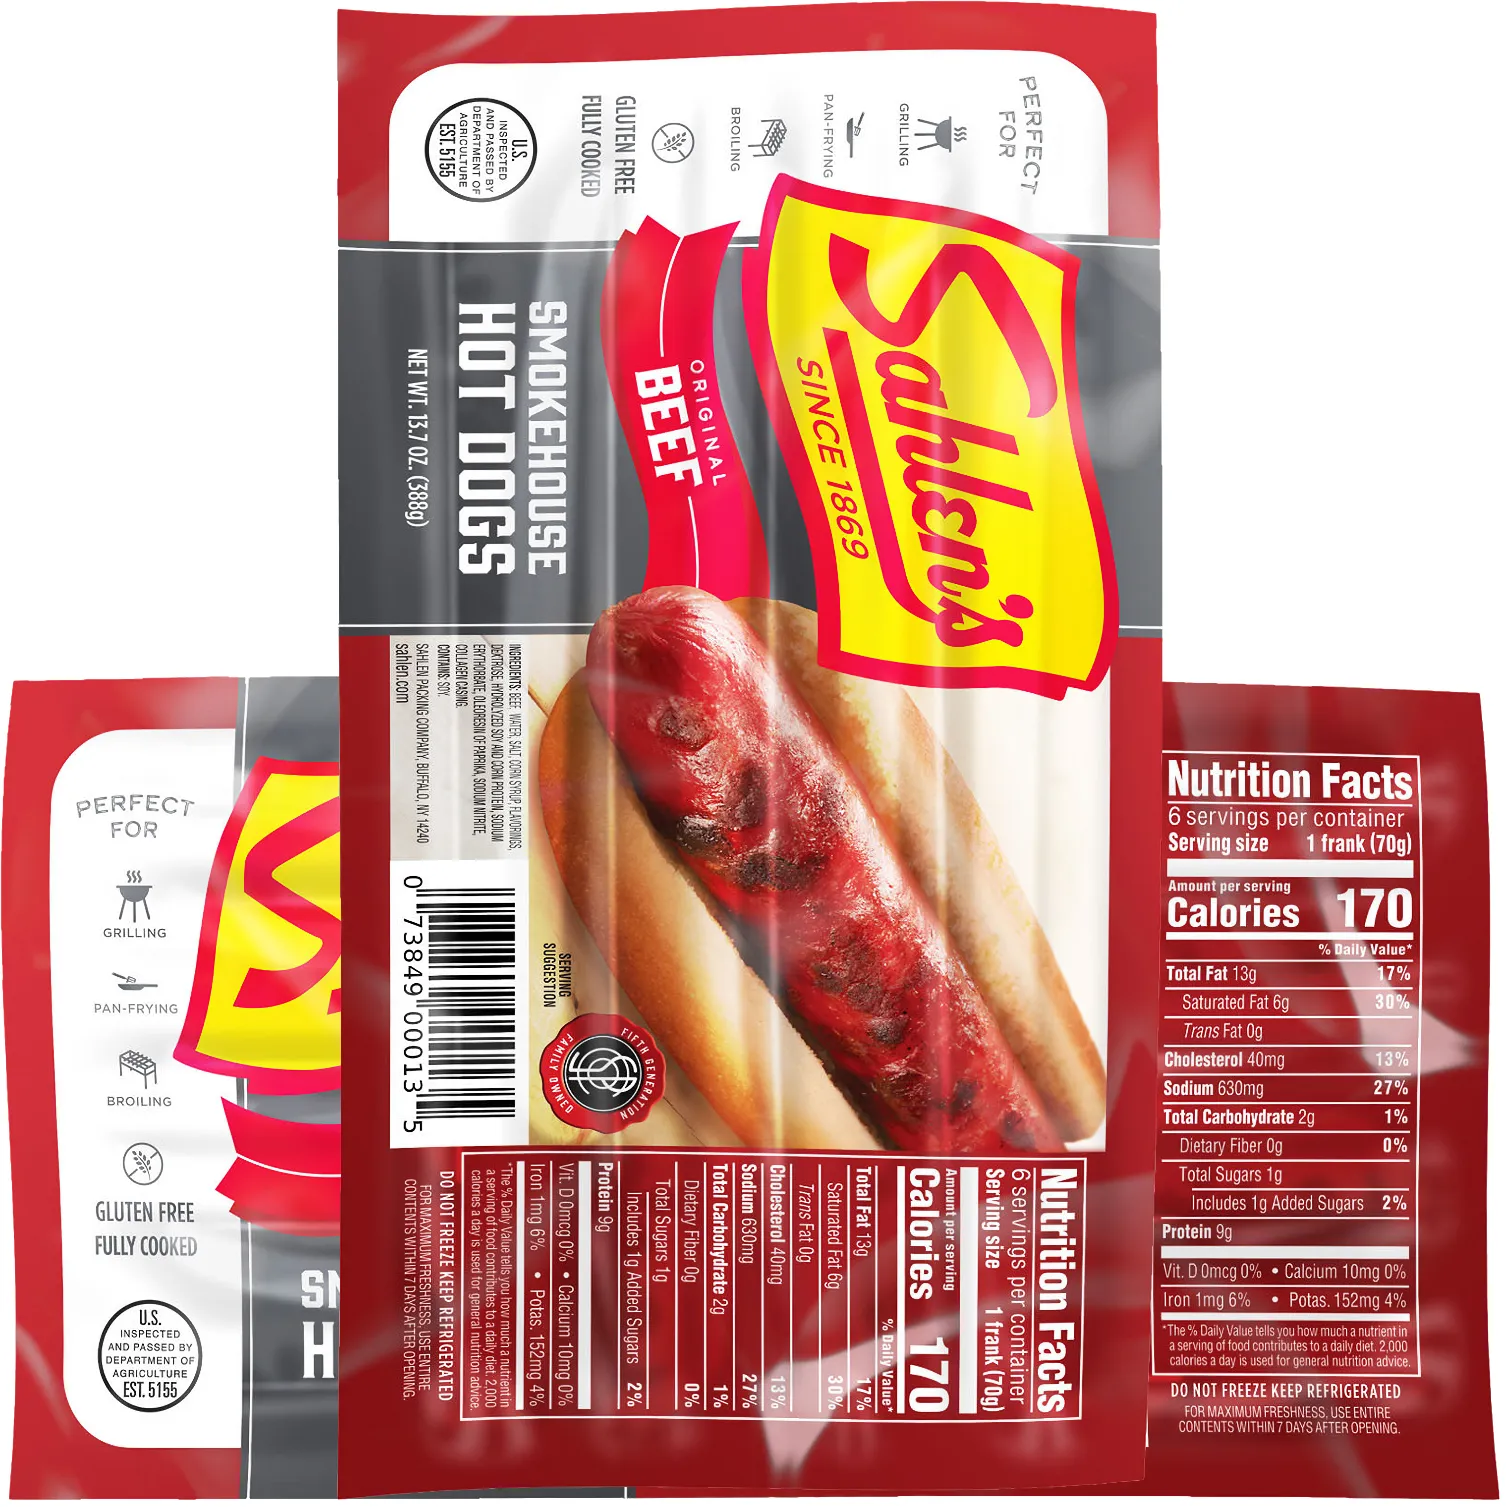 Free Pack Of Sahlen's Hot Dogs